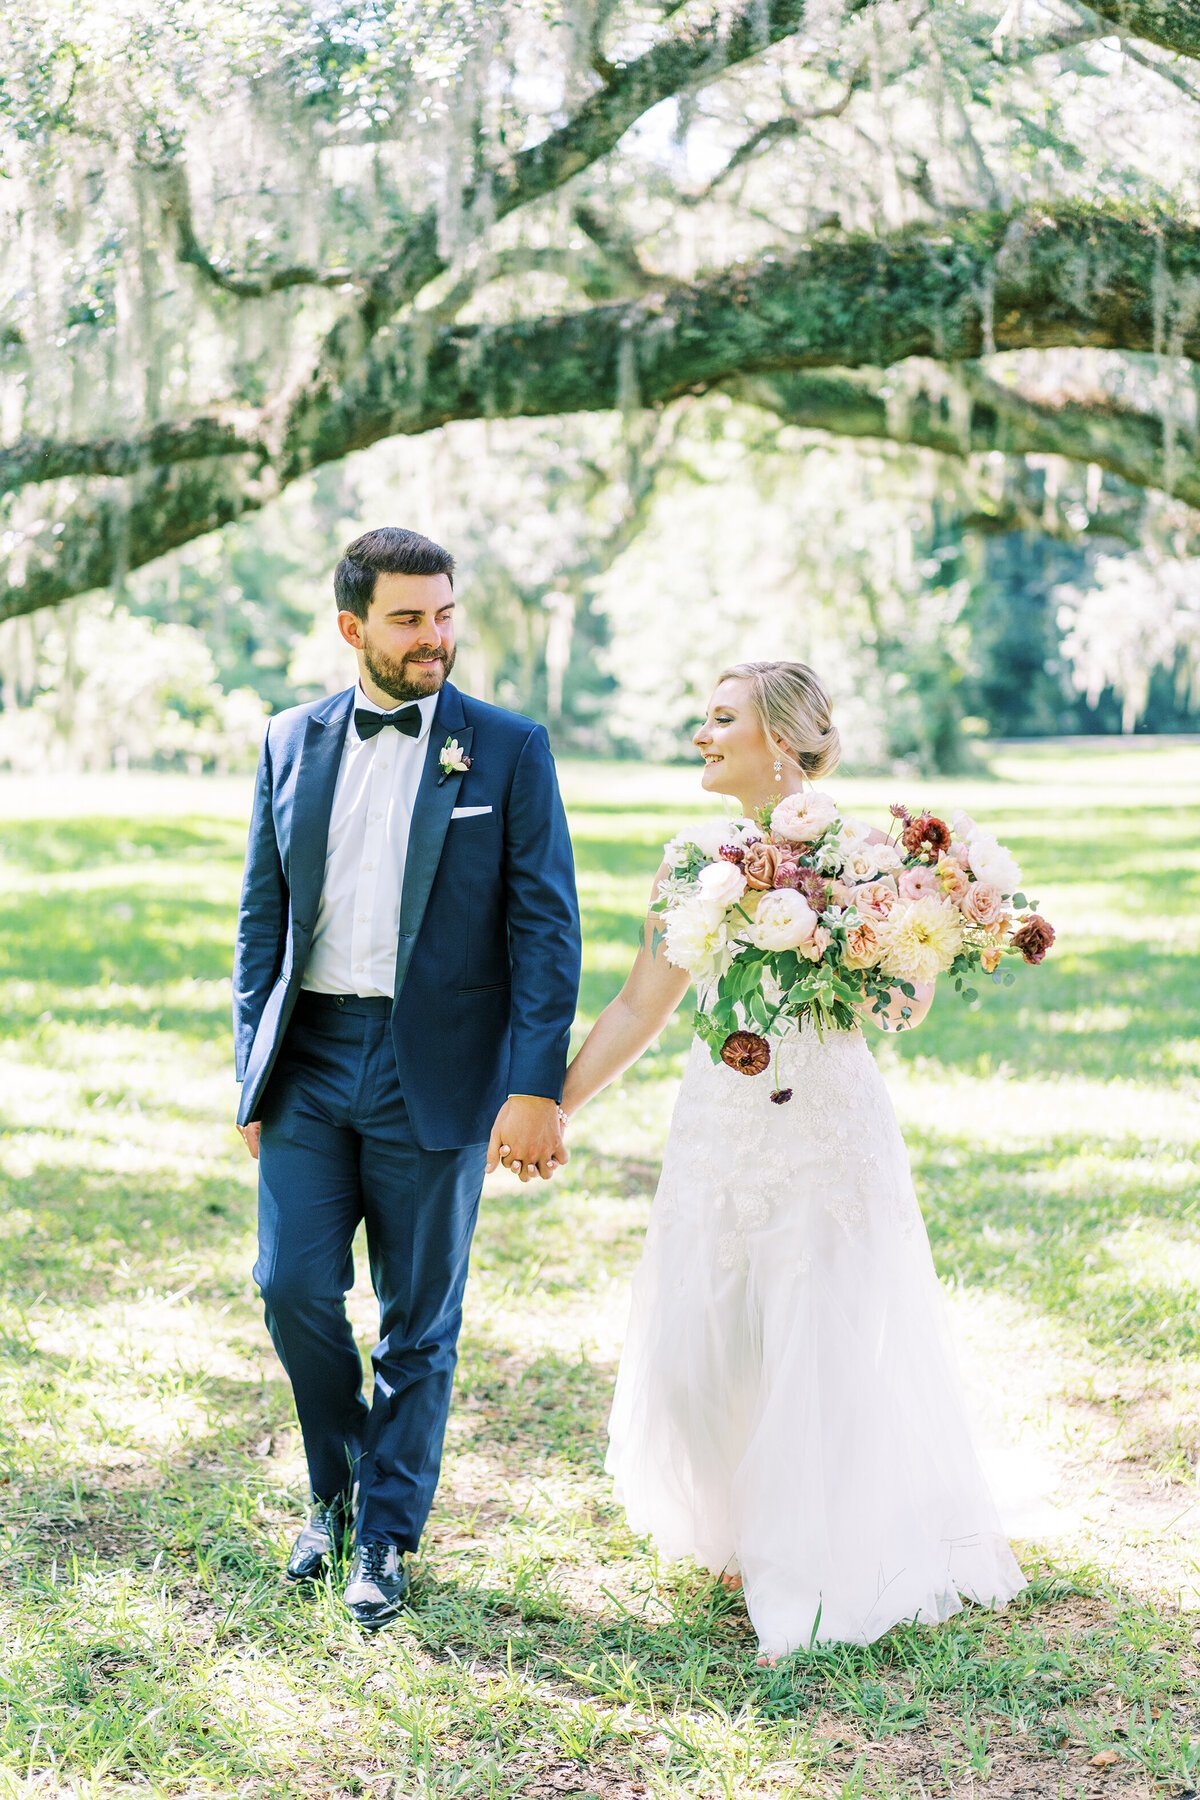 Kathryn + Will | Wedding at Magnolia Plantation by Pure Luxe Bride: Charleston Wedding and Event Planners